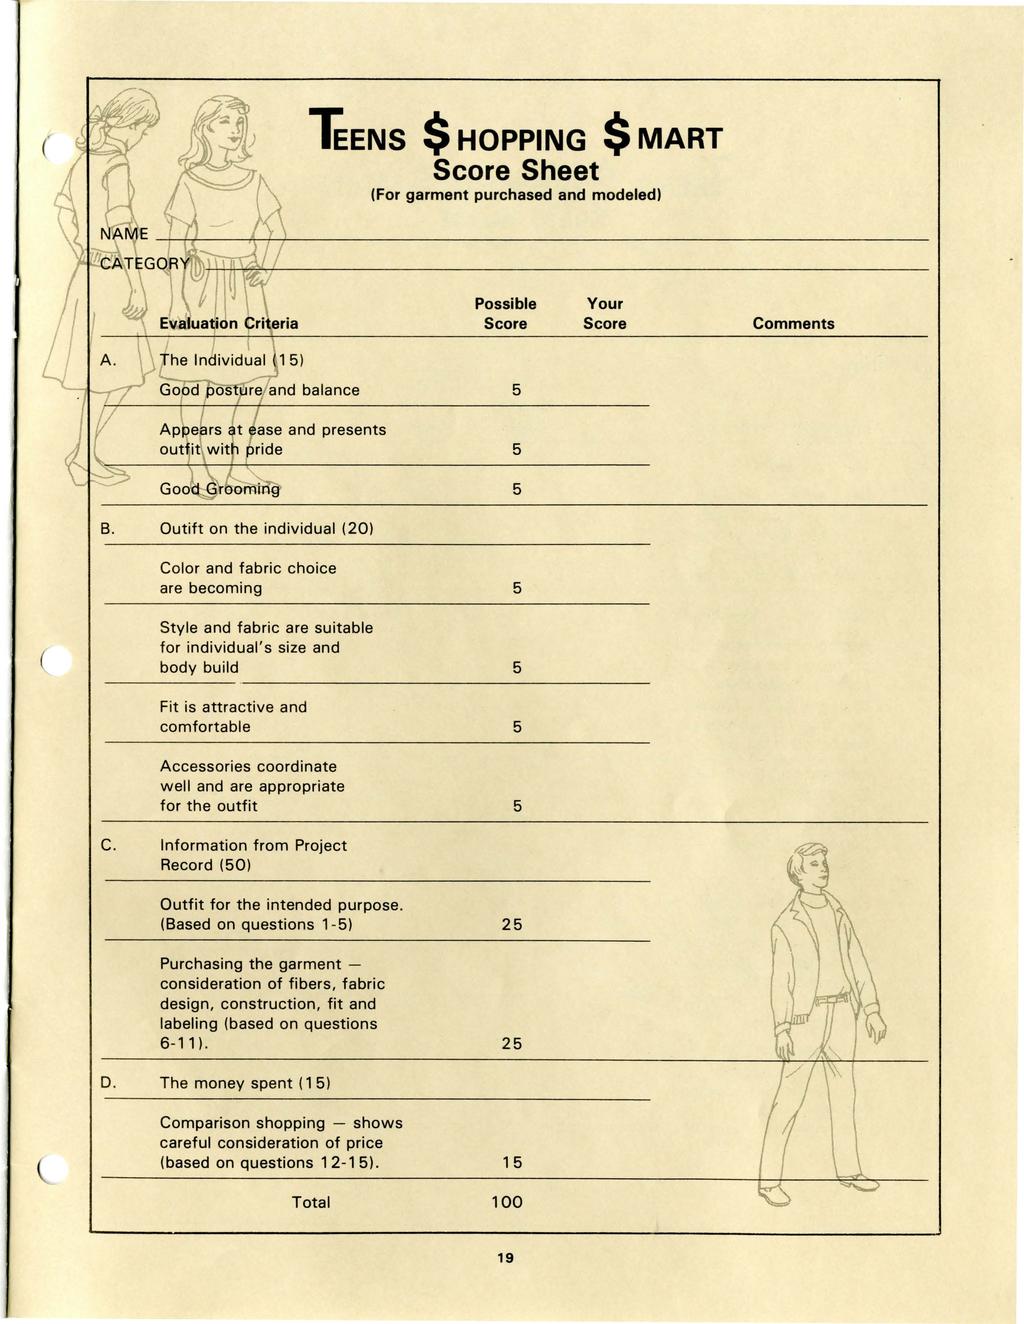 TEENS $ HOPPING $ MART Score Sheet (For garment purchased and modeled) Possible Score Your Score Comments 5 5 5 B.